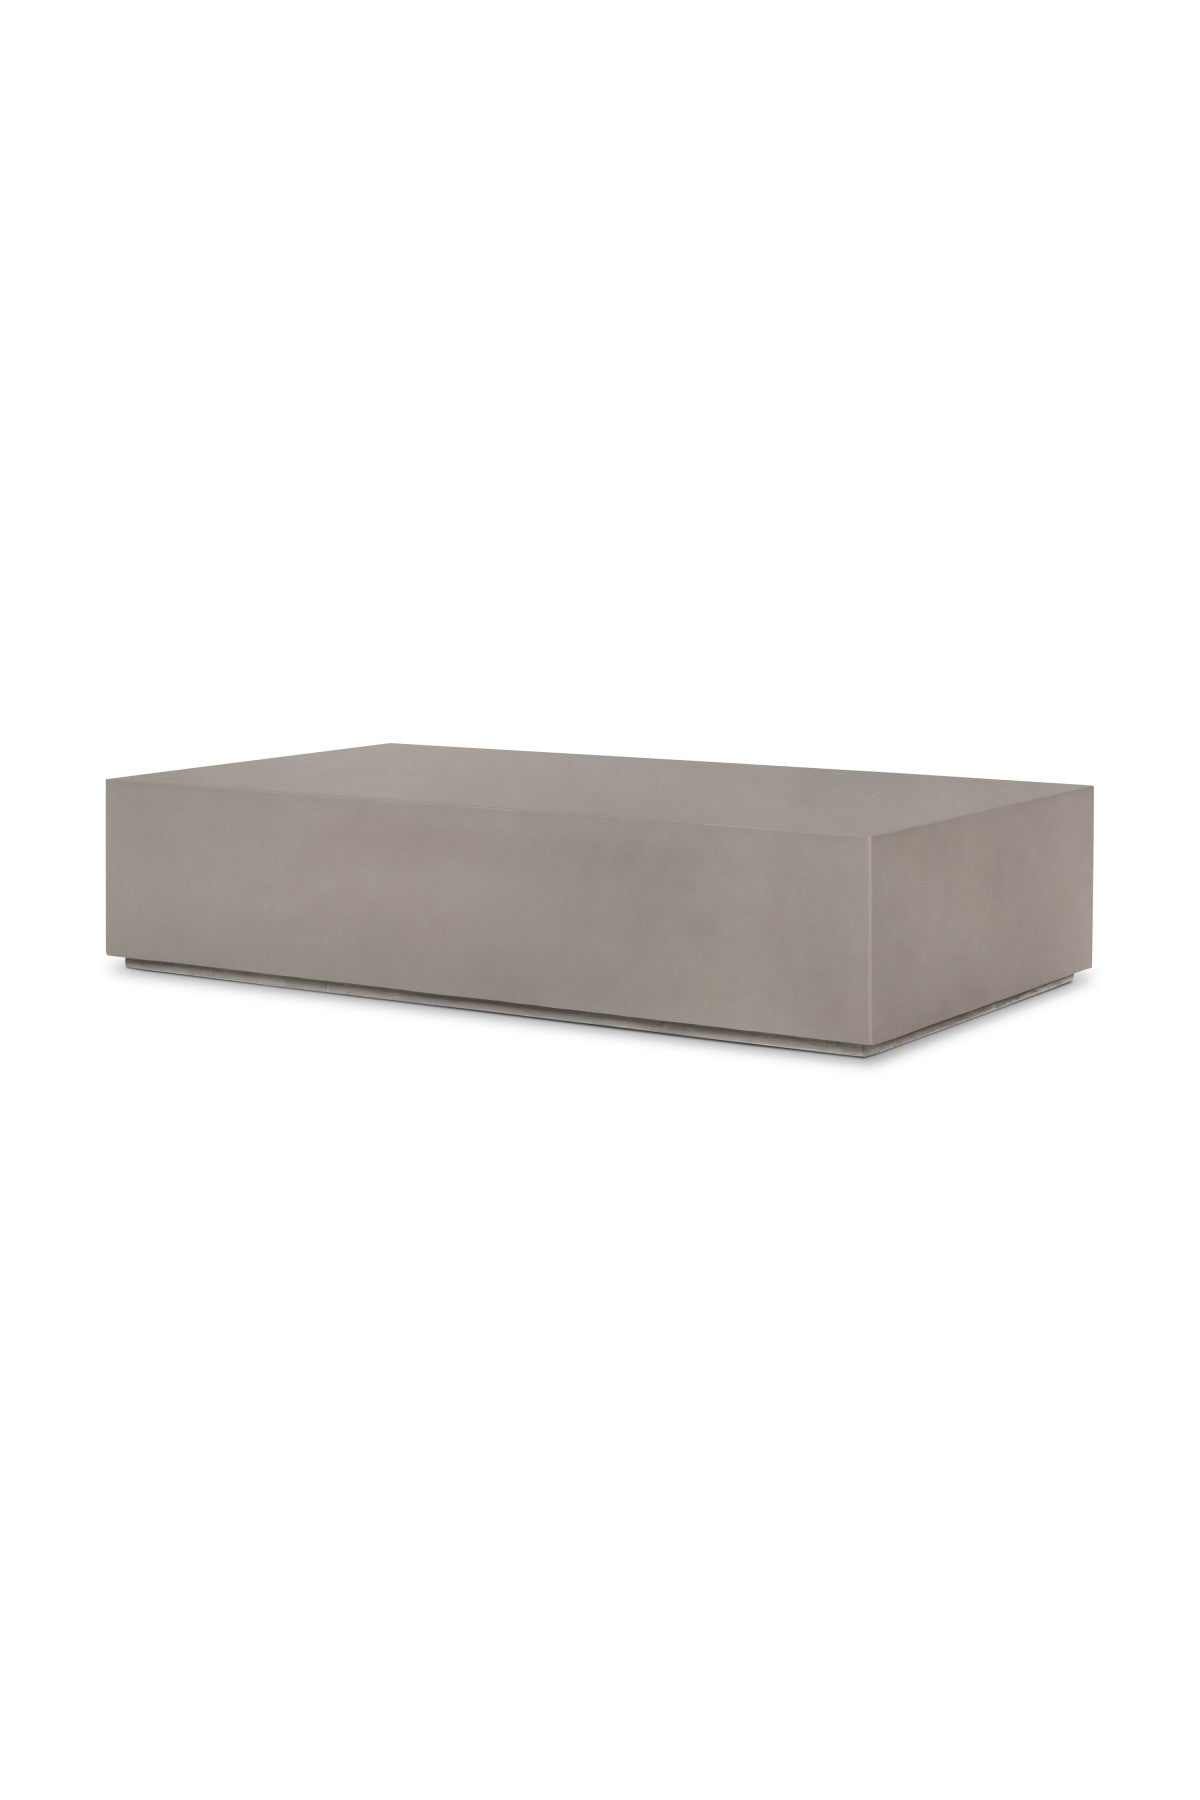 Delson Outdoor Coffee Table